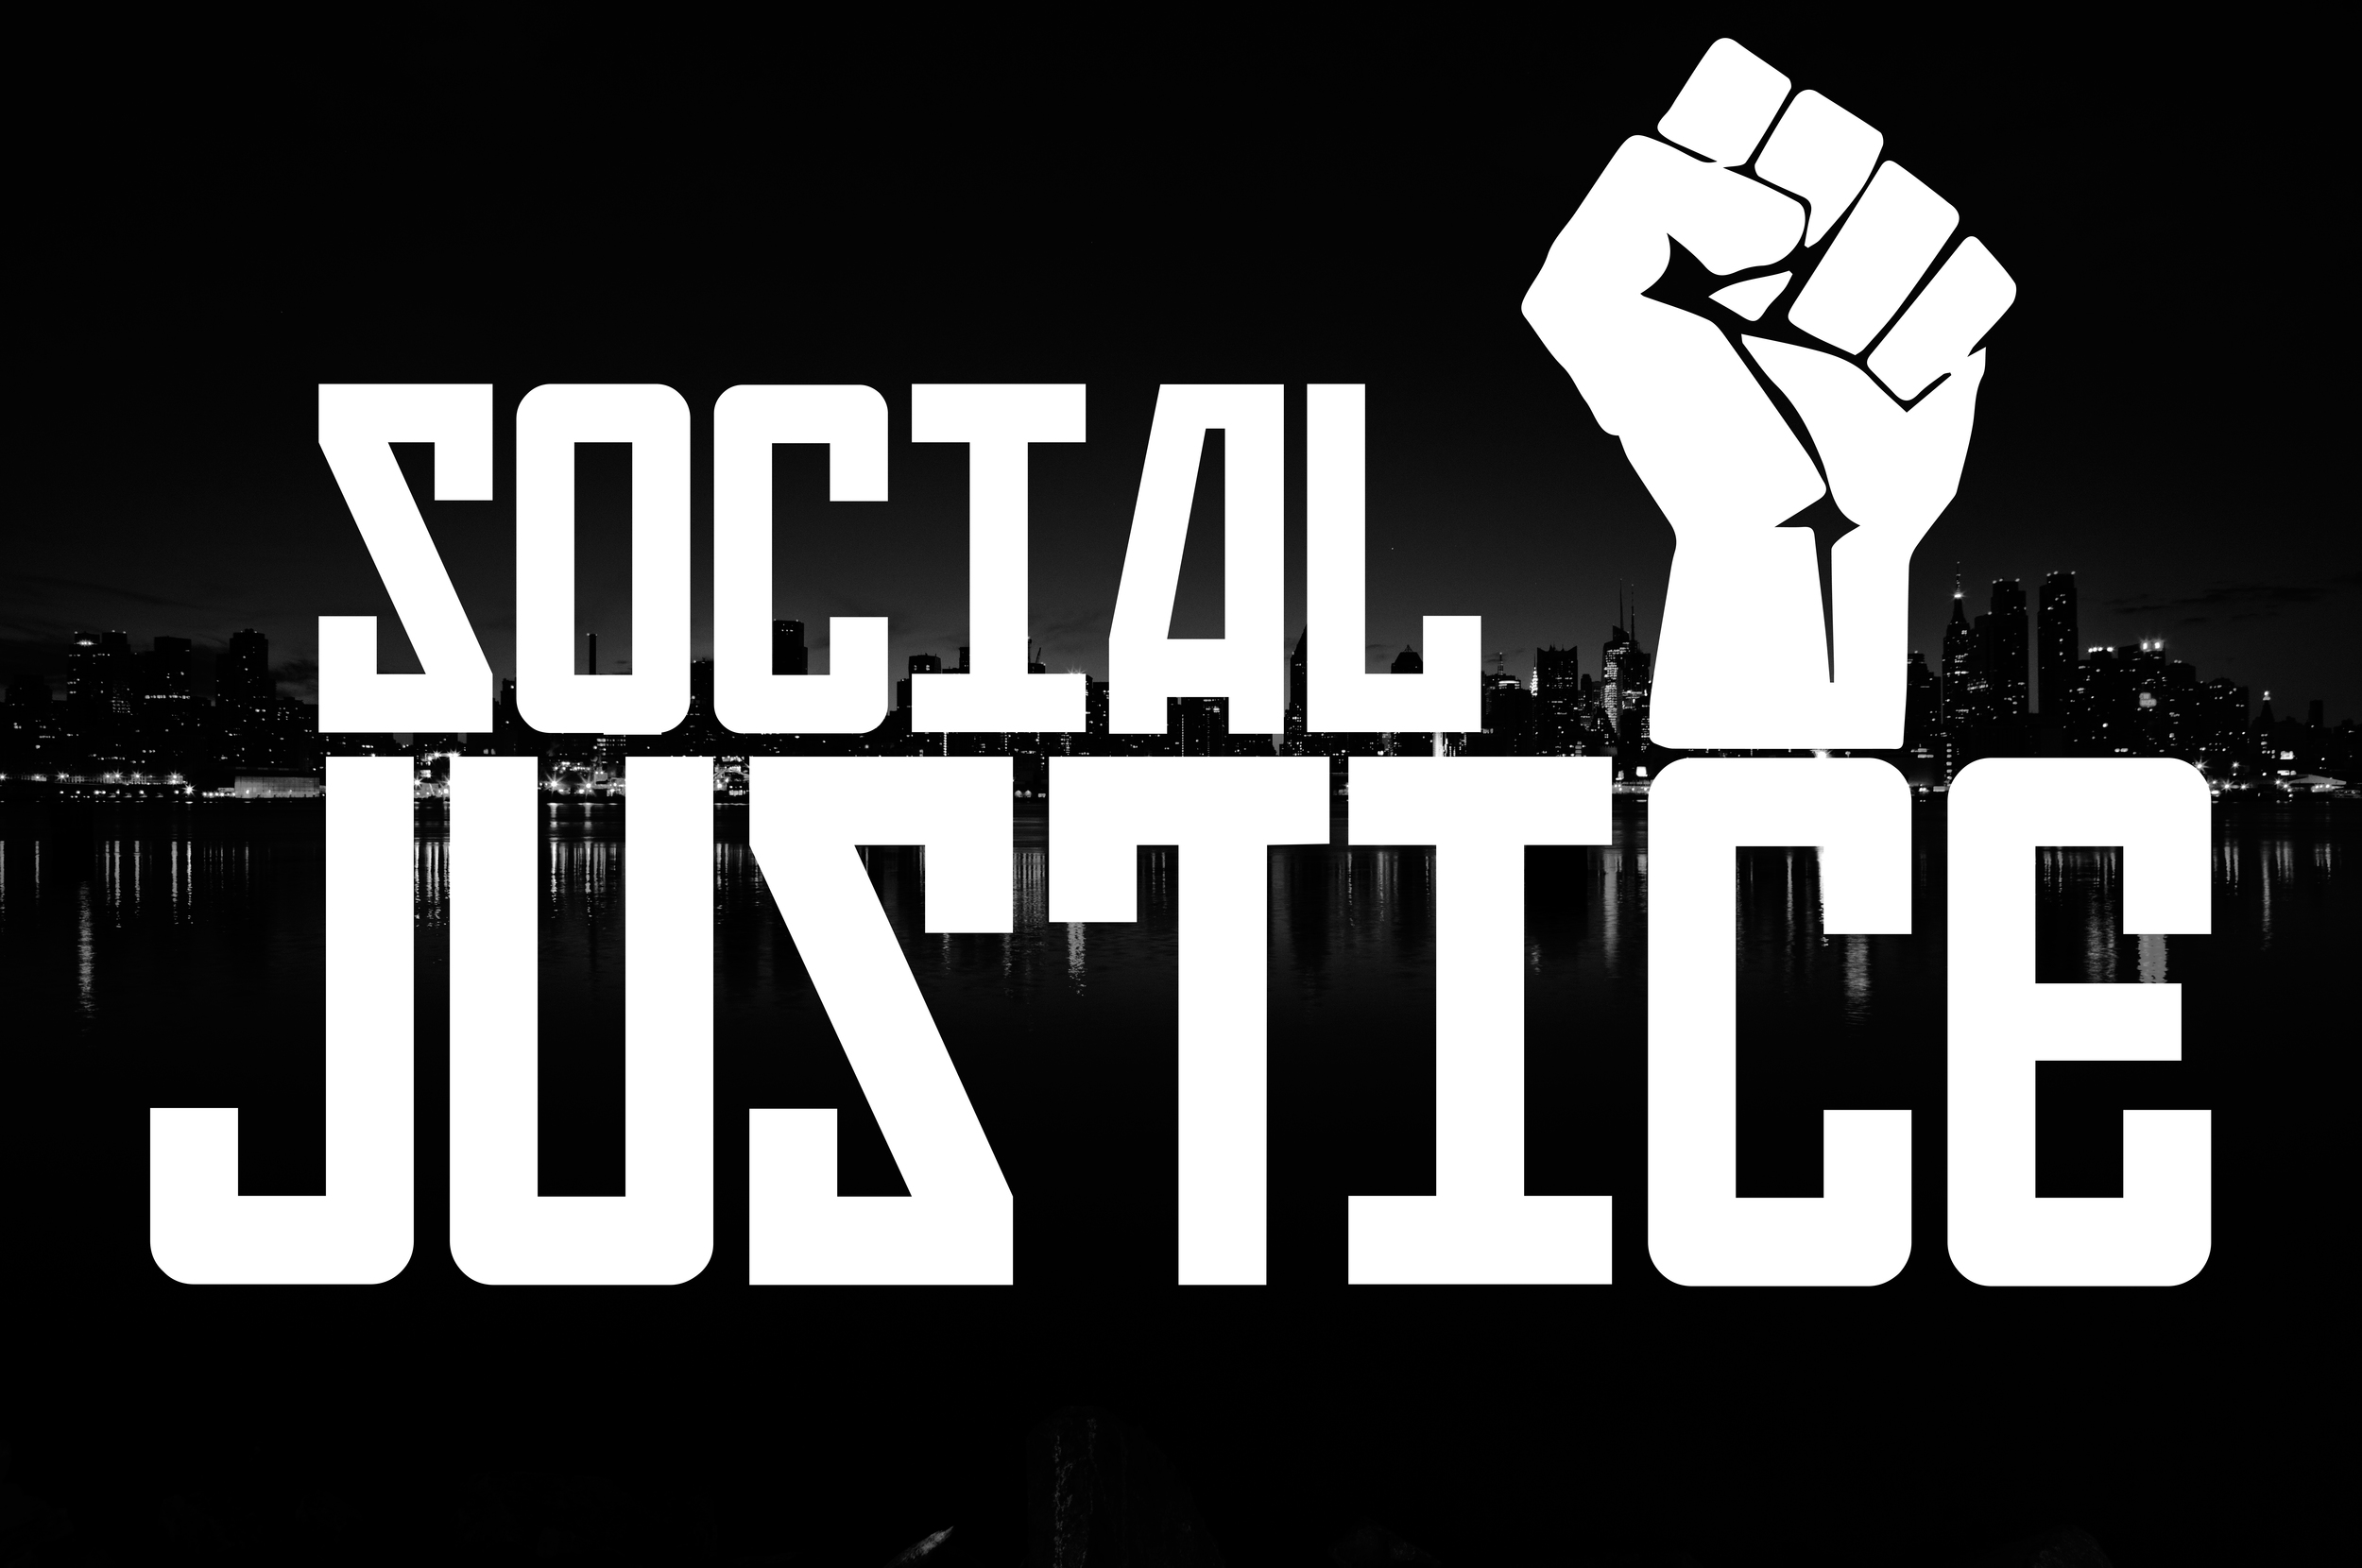 Image: What if the ‘social justice’ companies were slaveholders?